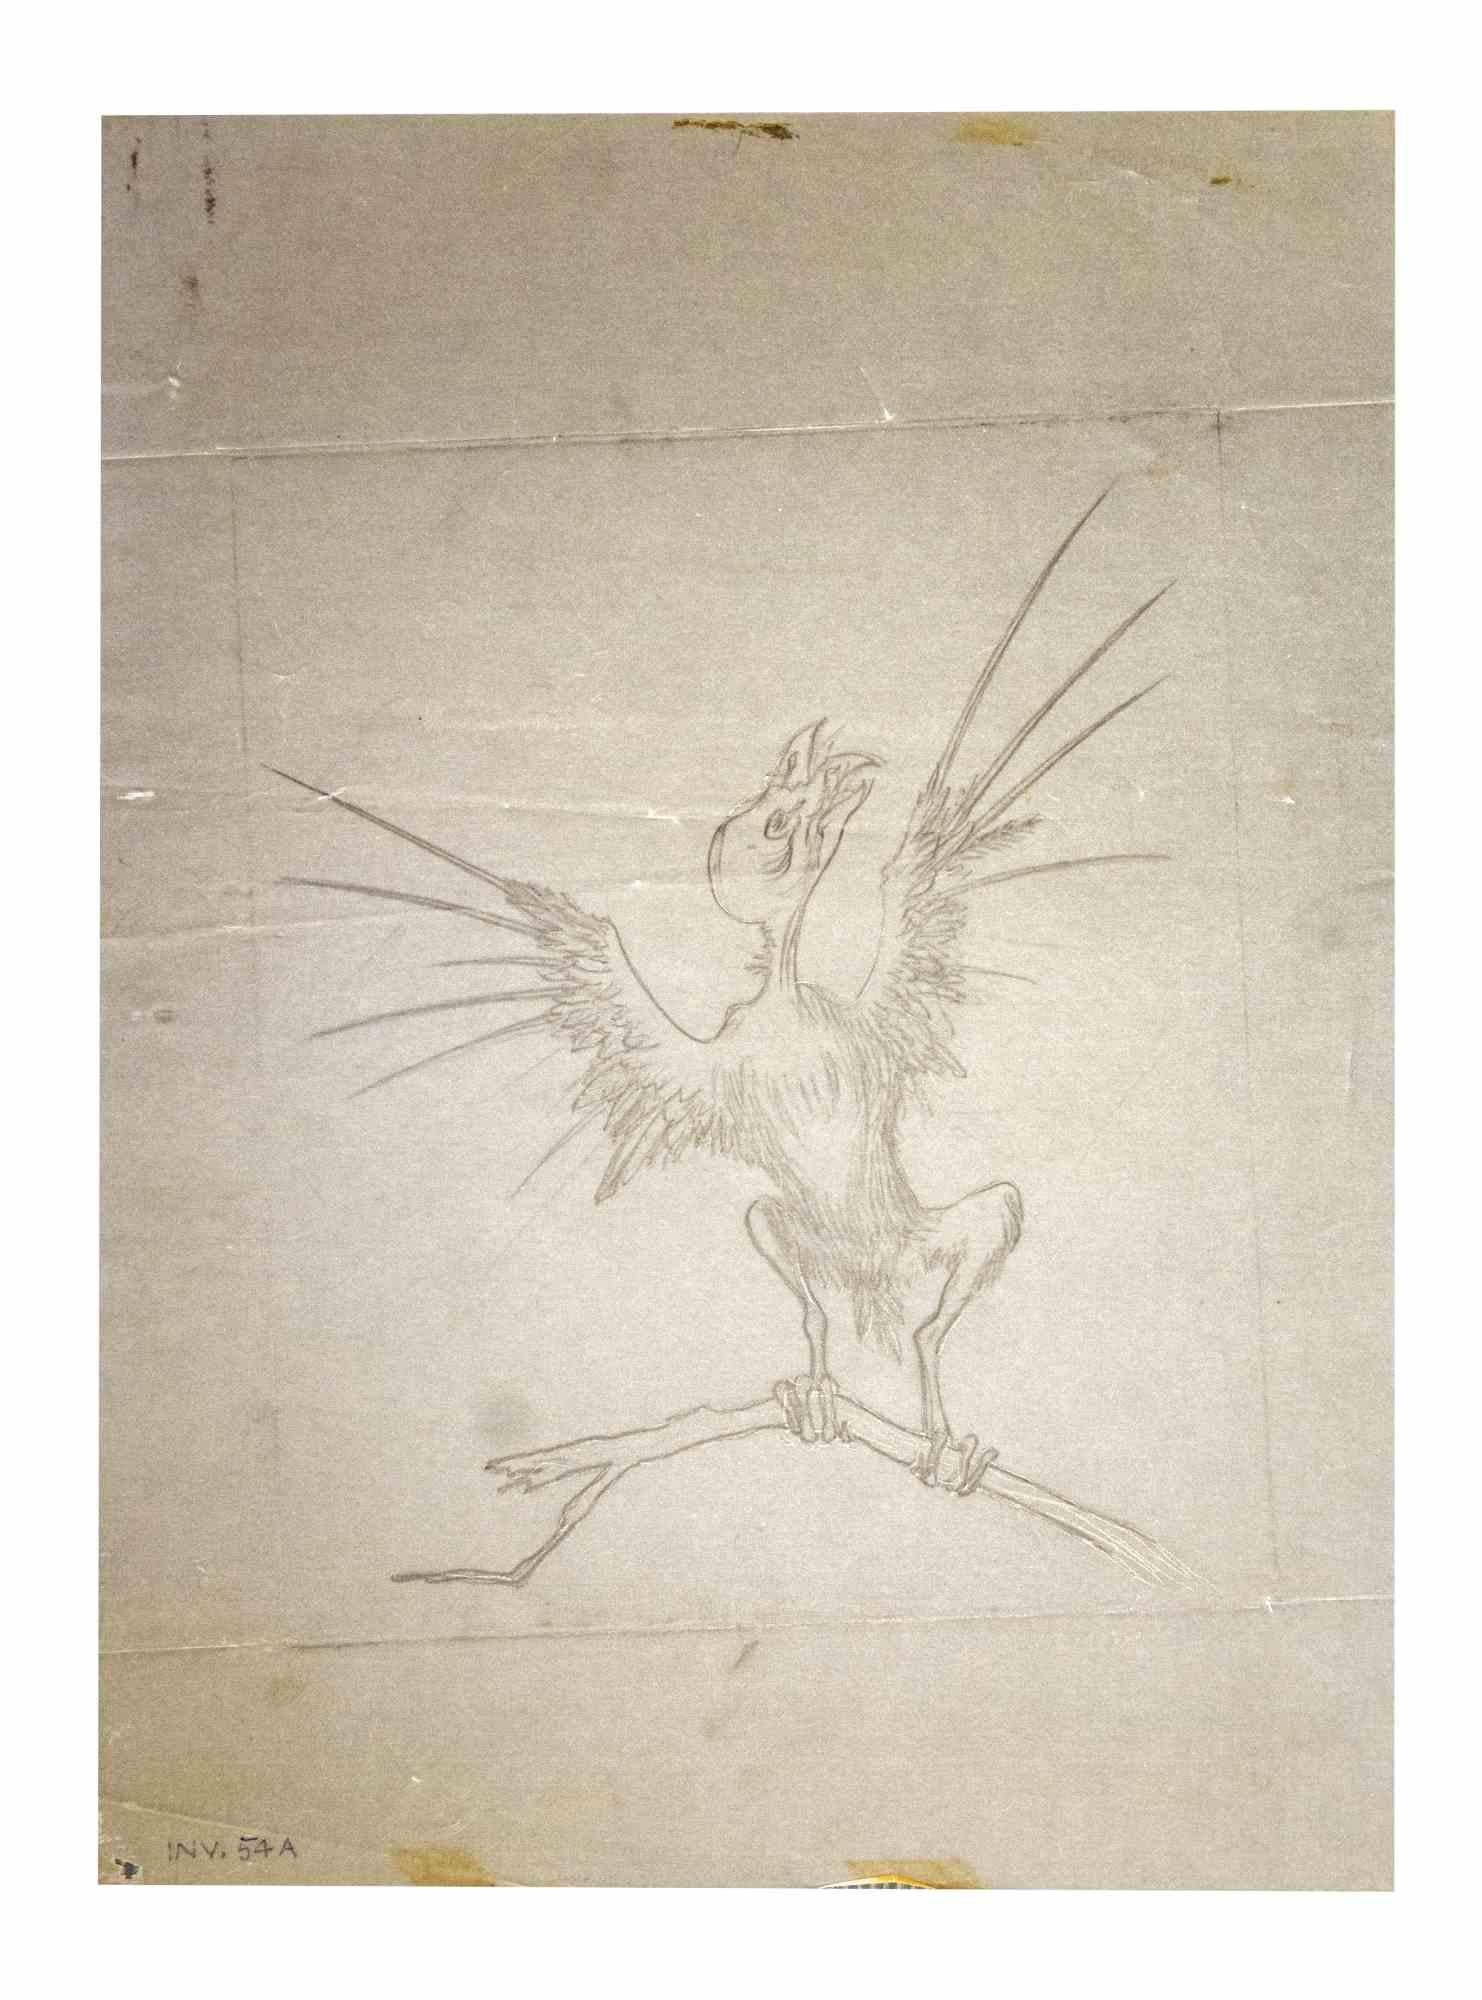 The Bird - Drawing by Leo Guida - 1970s